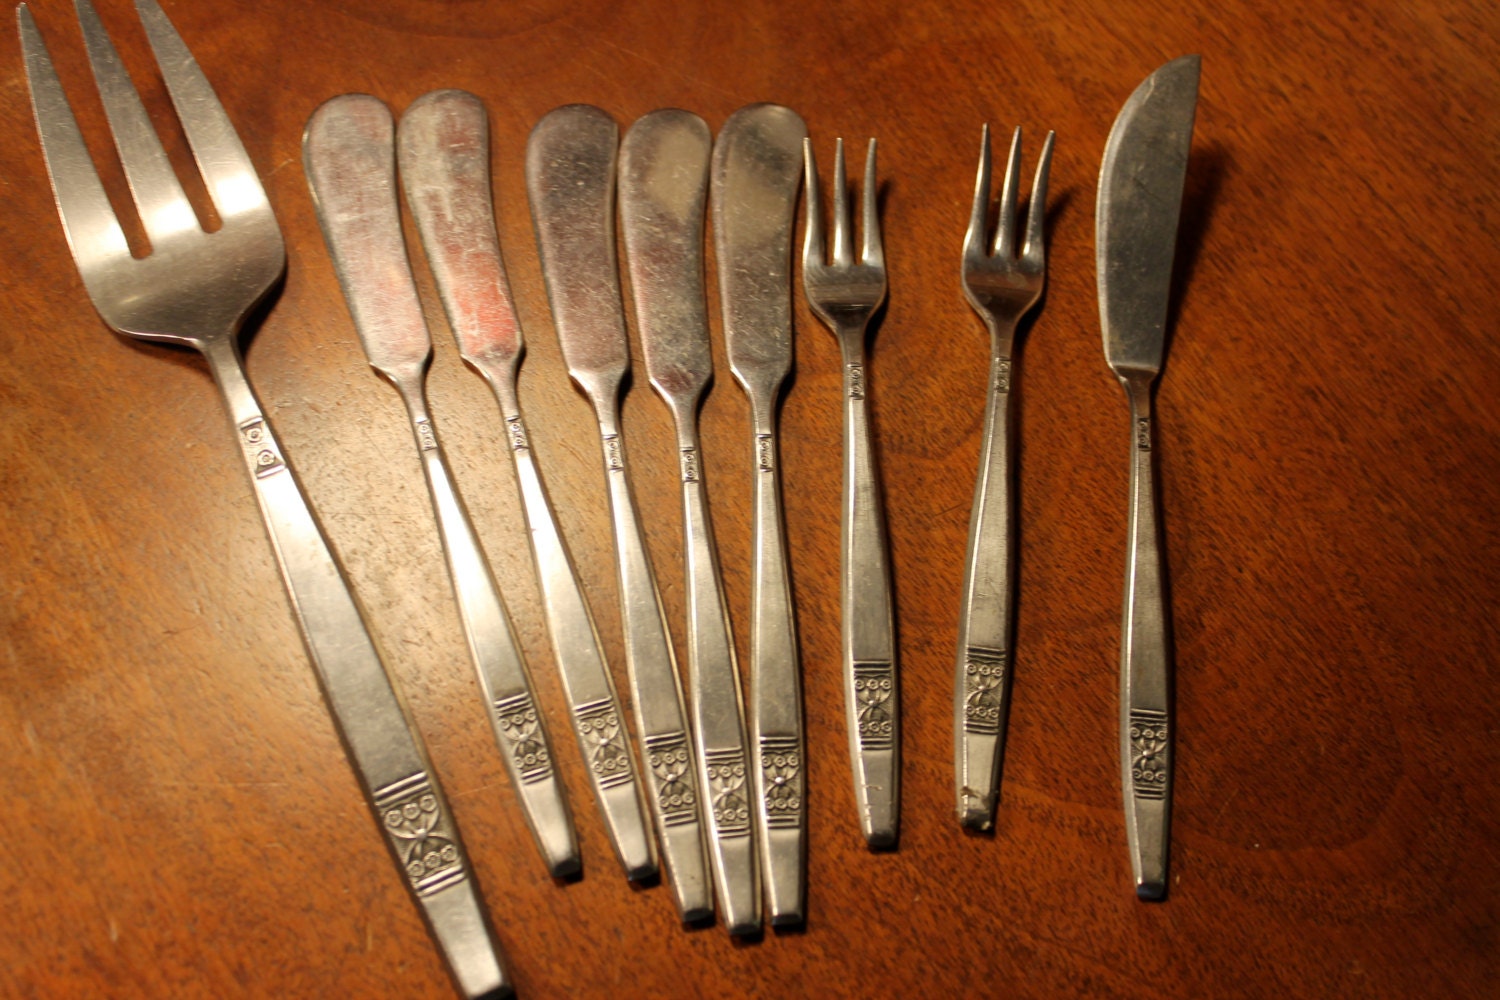 301 Moved Permanently Vintage Stainless Steel Japan Flatware